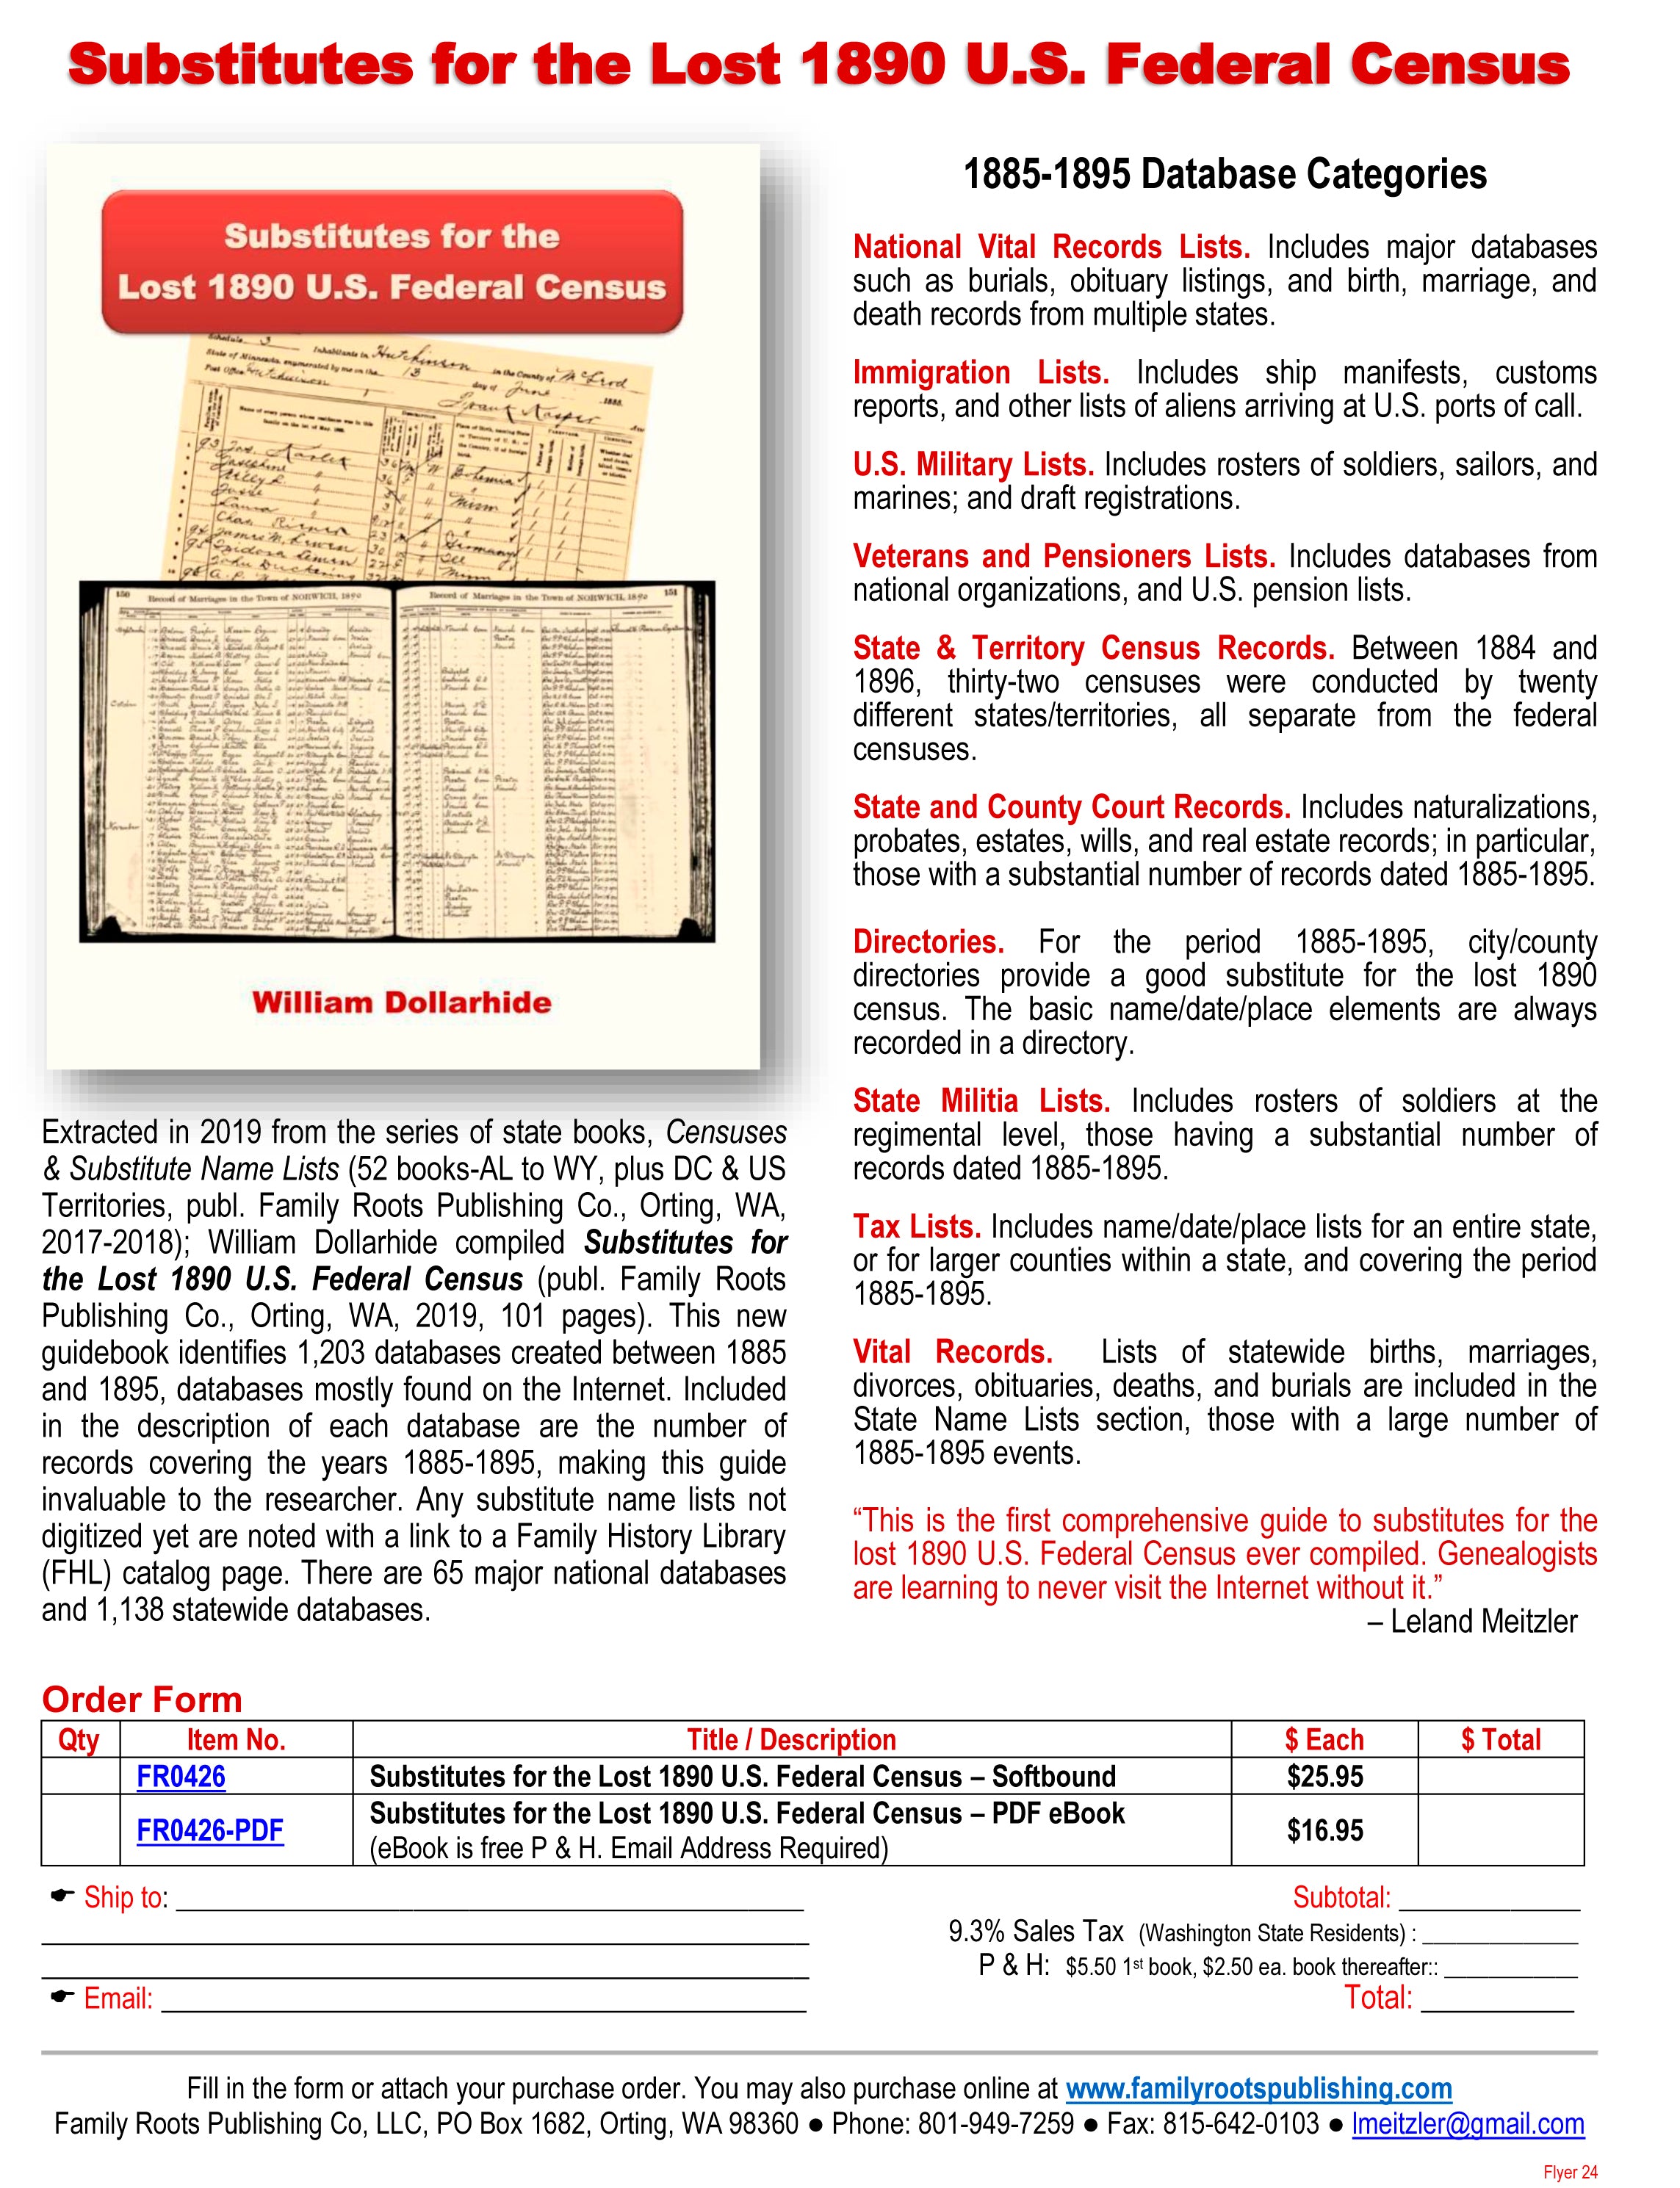 FREE FLYER: Downloadable PDF Flyer - Substiutes for the Lost 1890 U.S. Federal Census